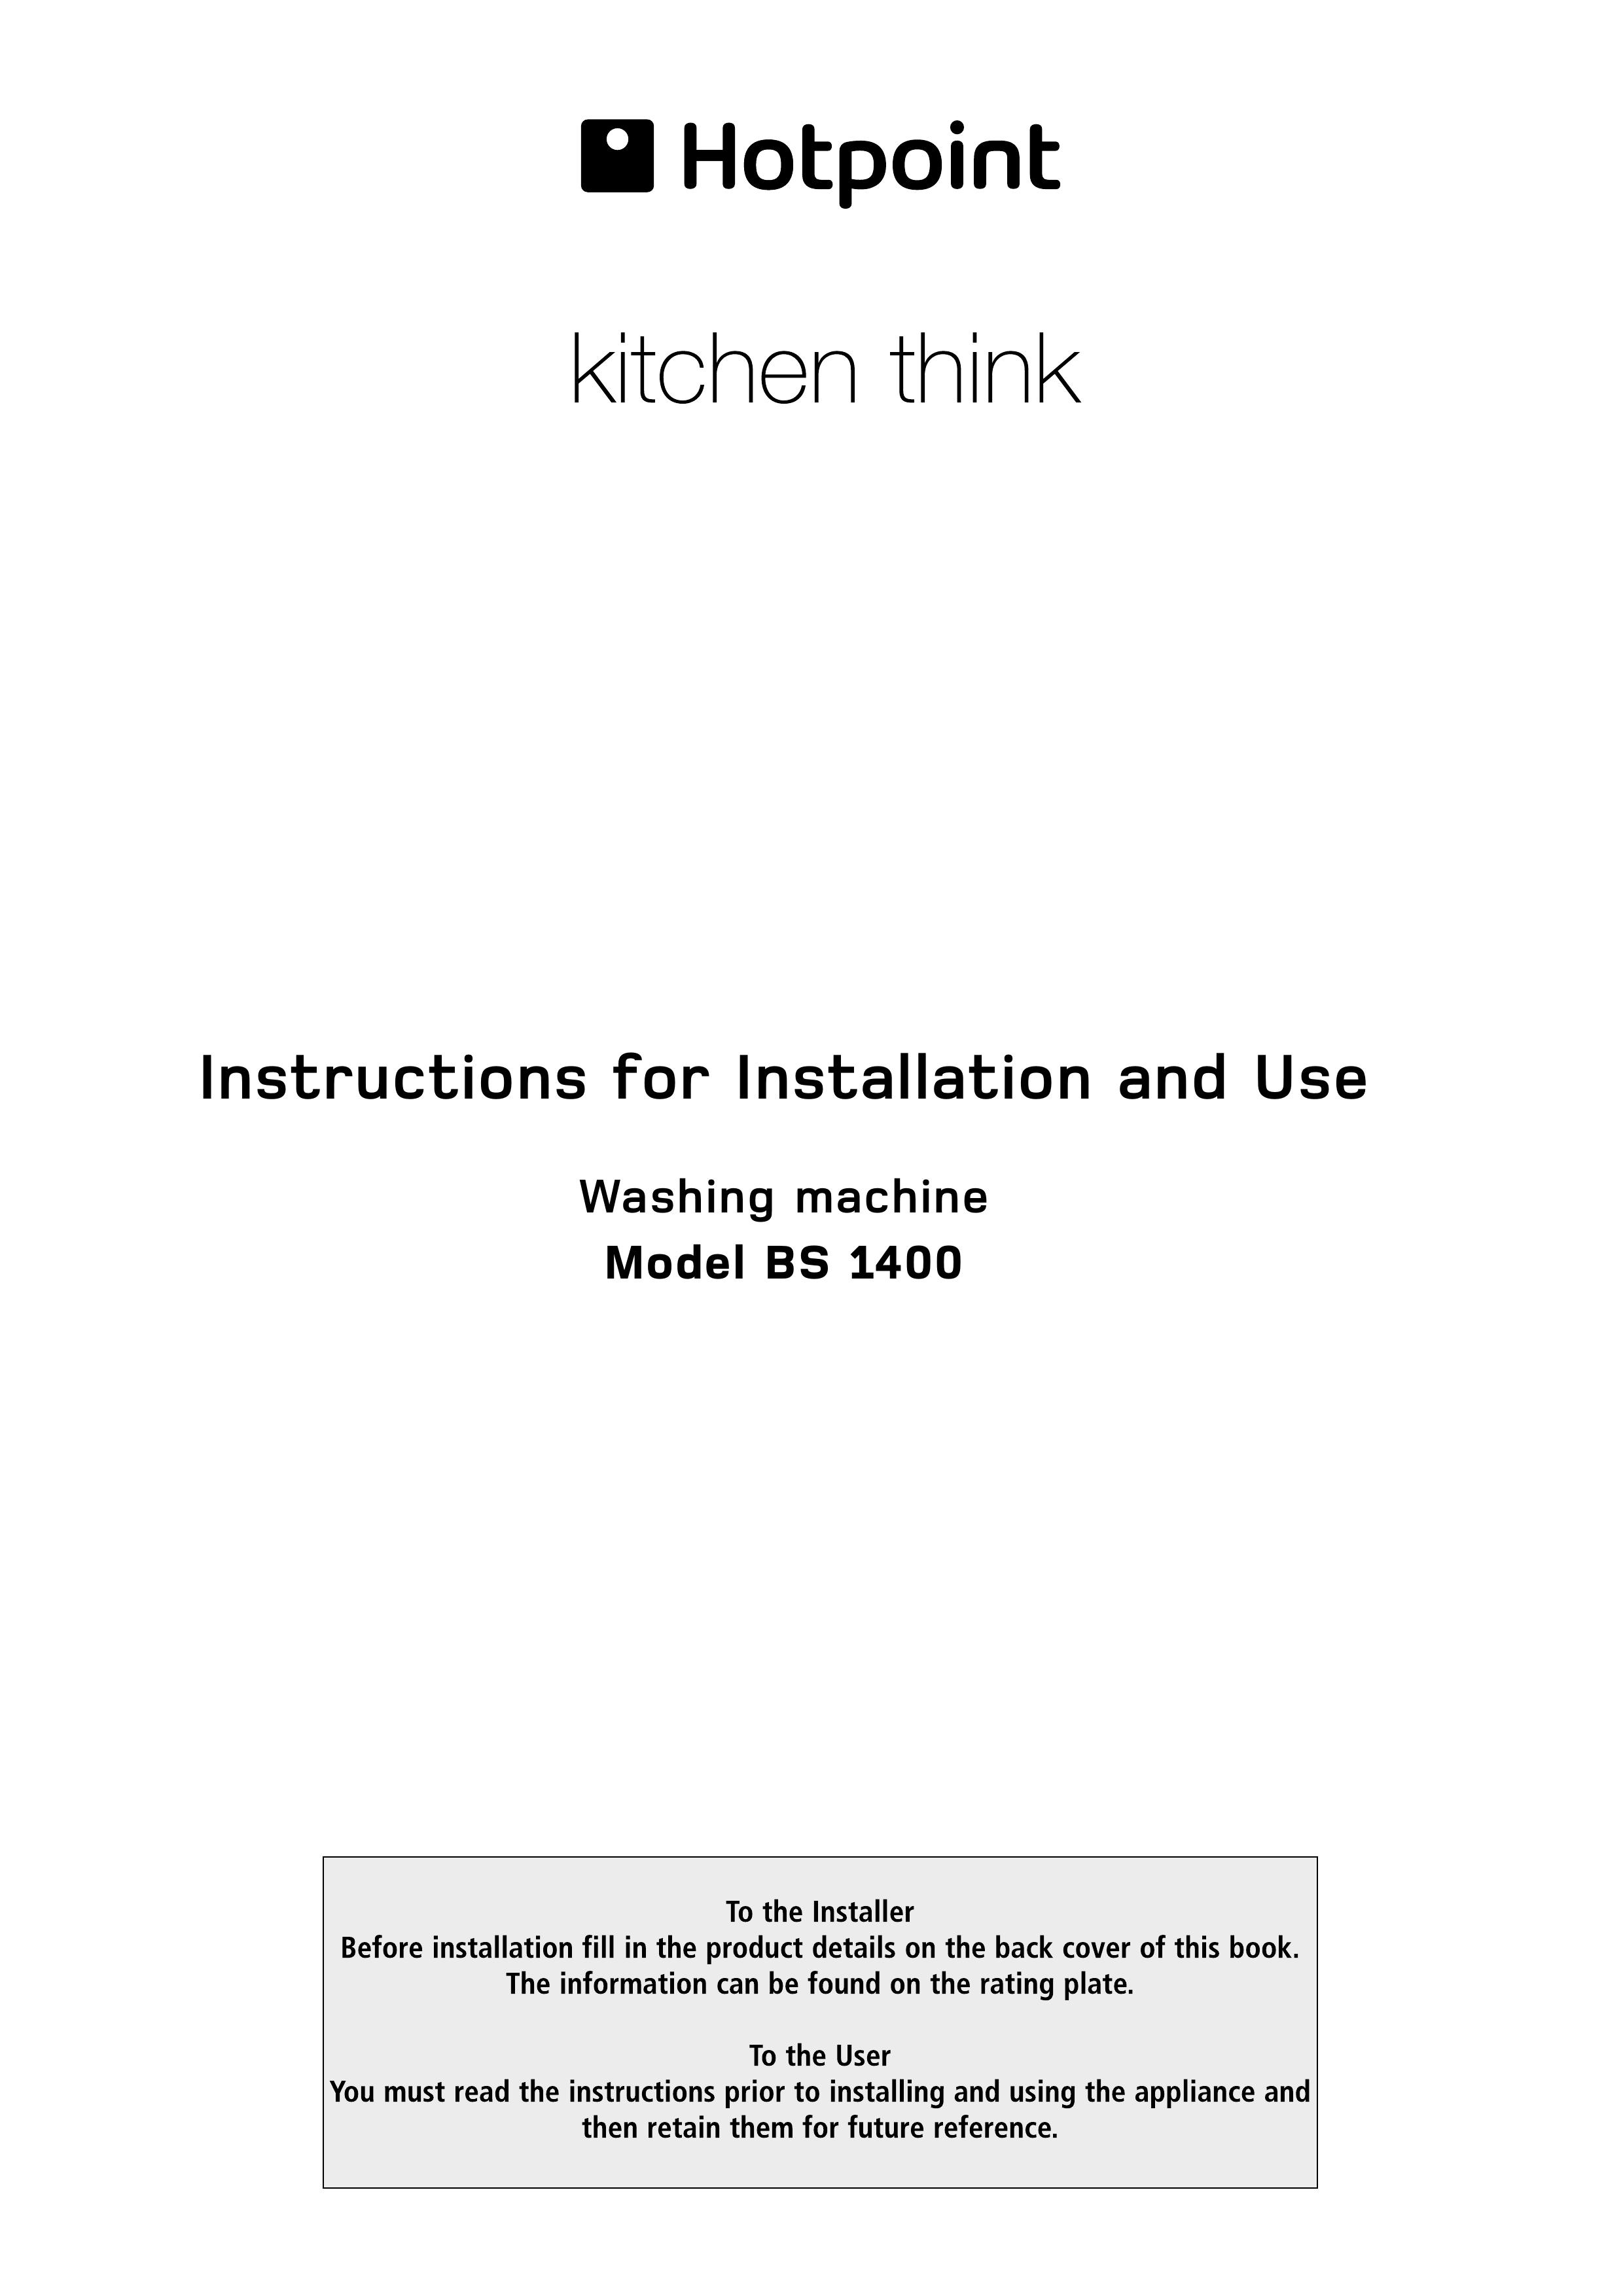 Hotpoint BS 1400 Washer User Manual